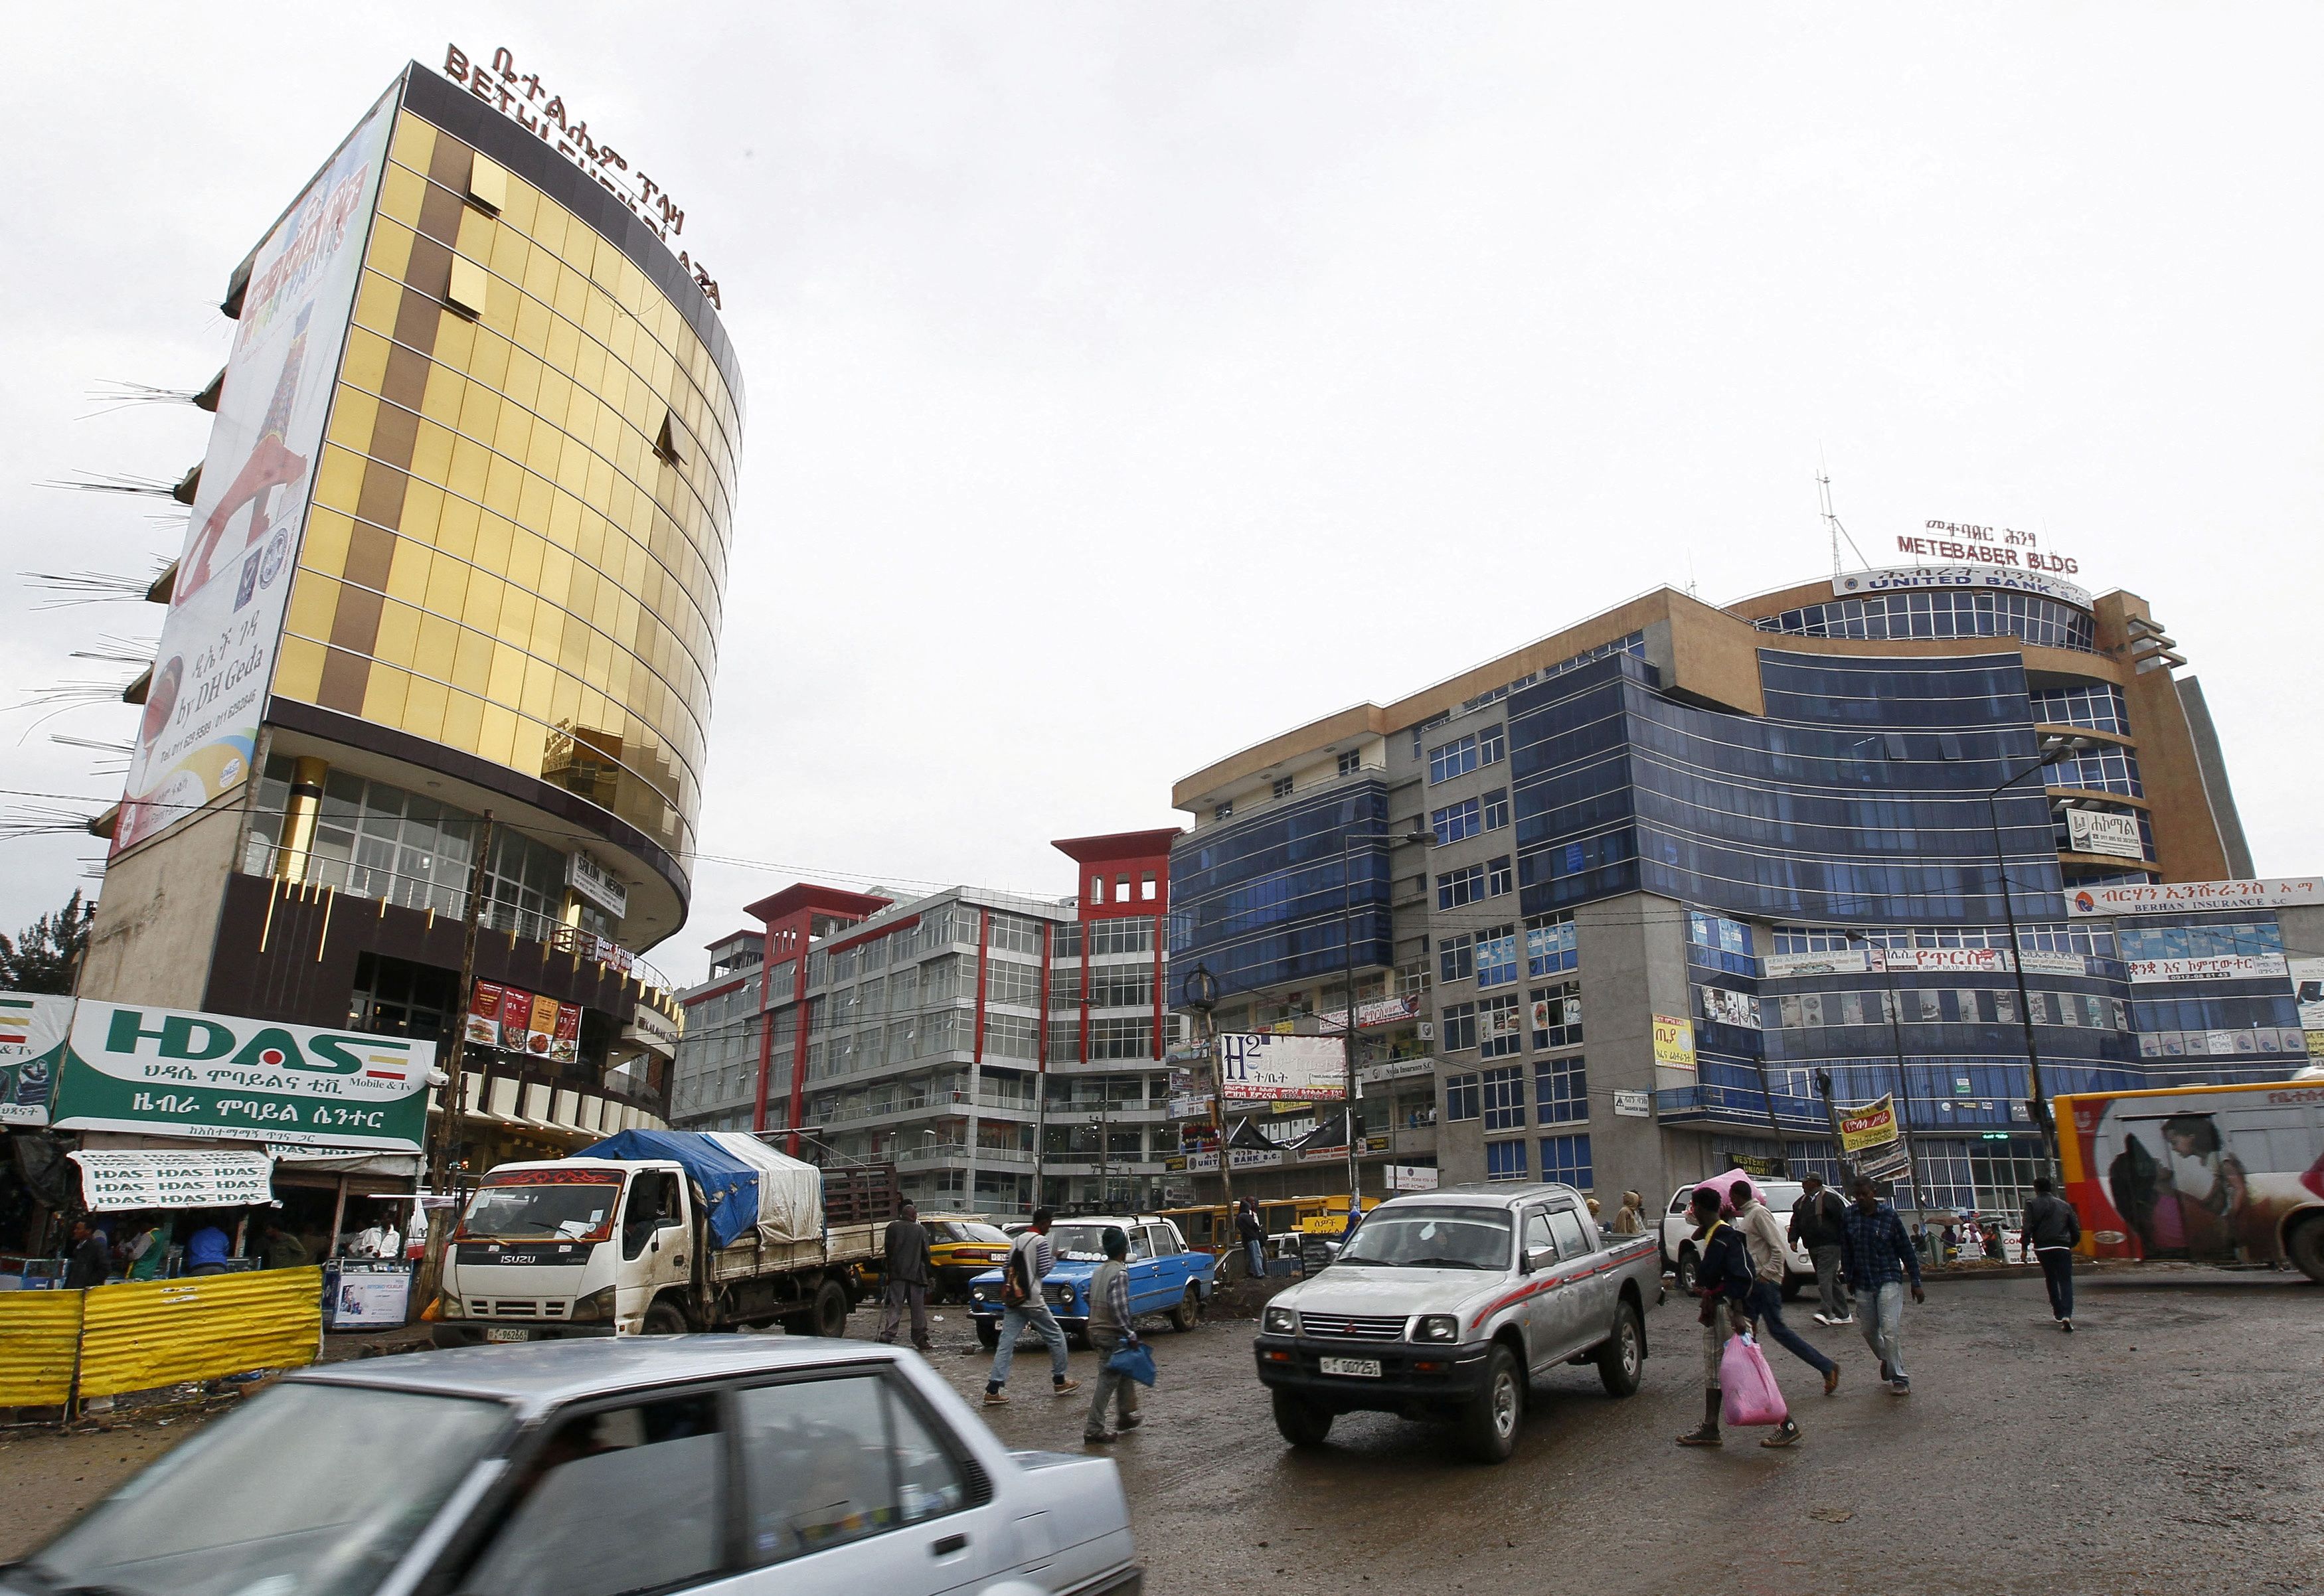 People walk through the streets of a shopping area in Addis Ababa